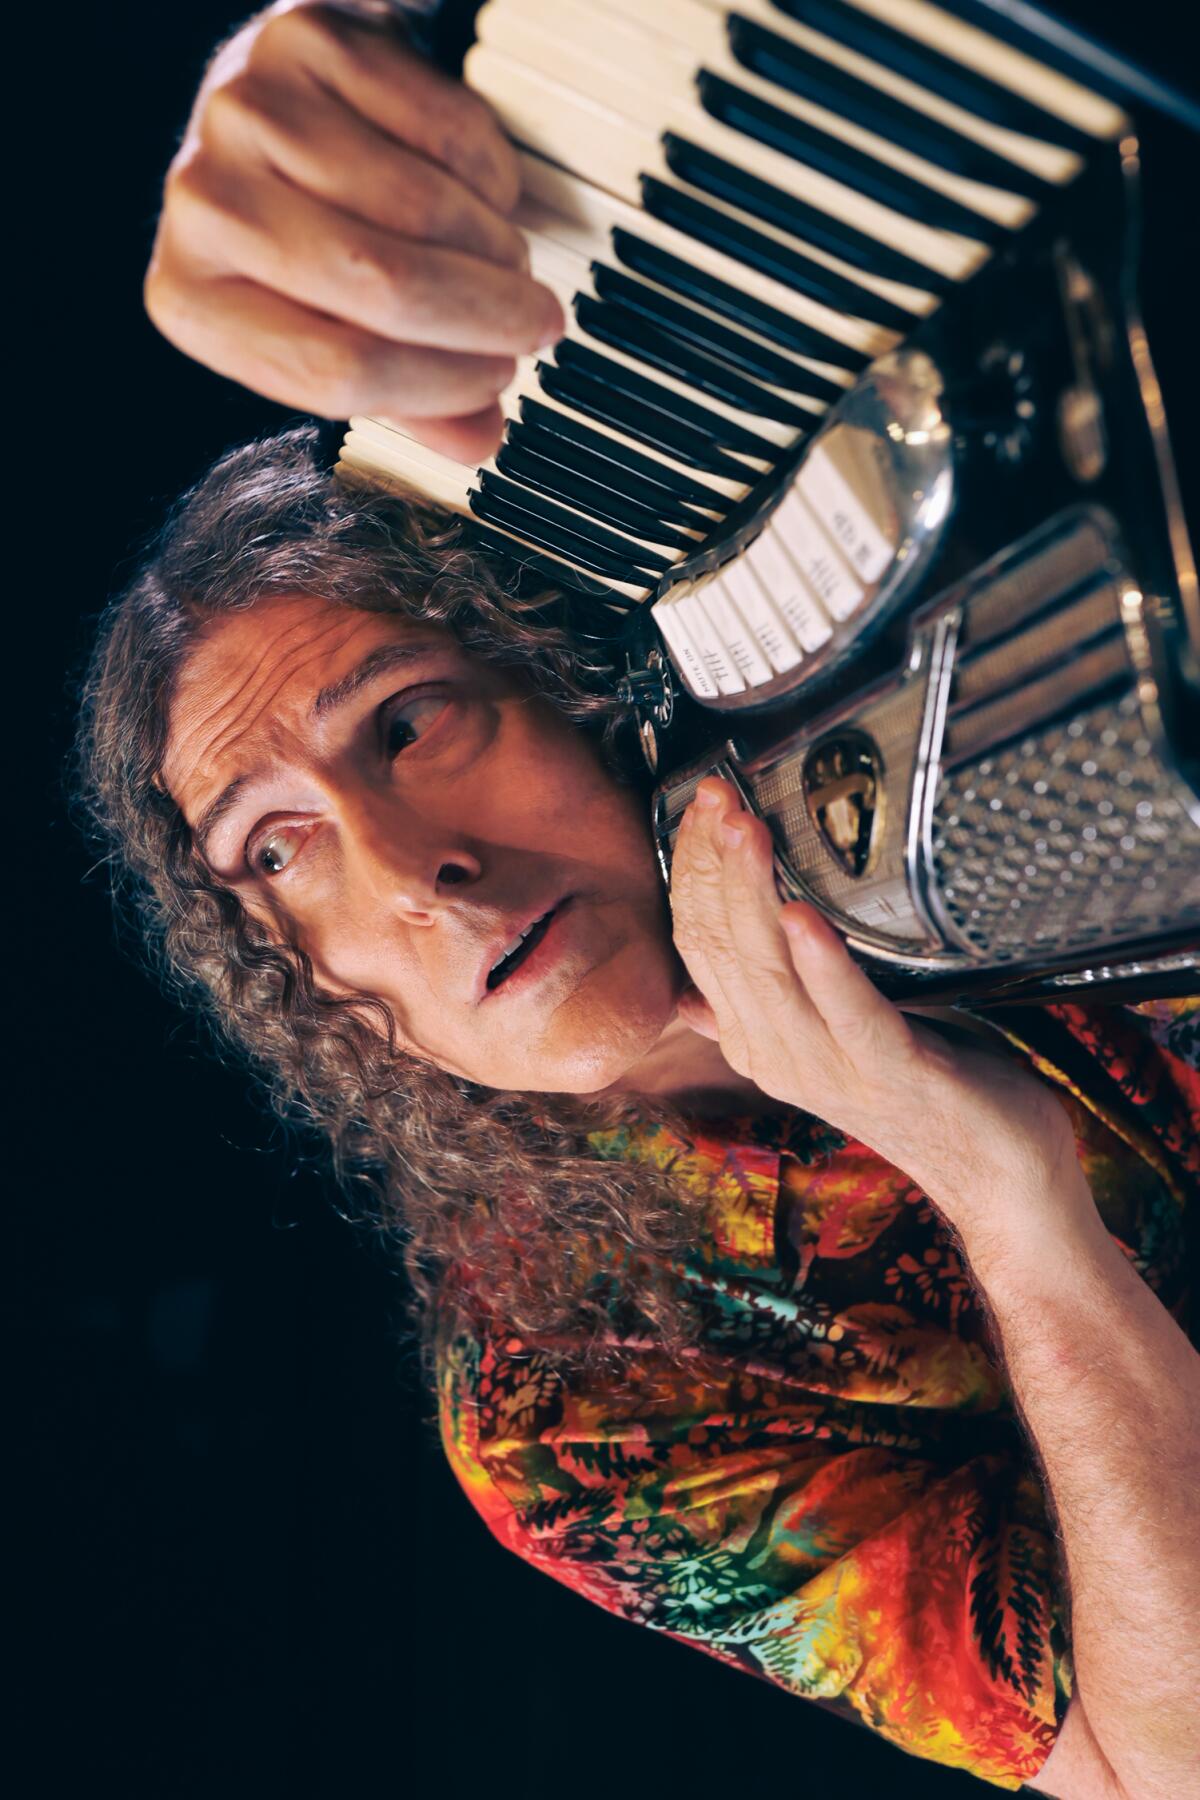 A long-haired, colorfully dressed man lovingly embracing his accordion, staring emotively off in space